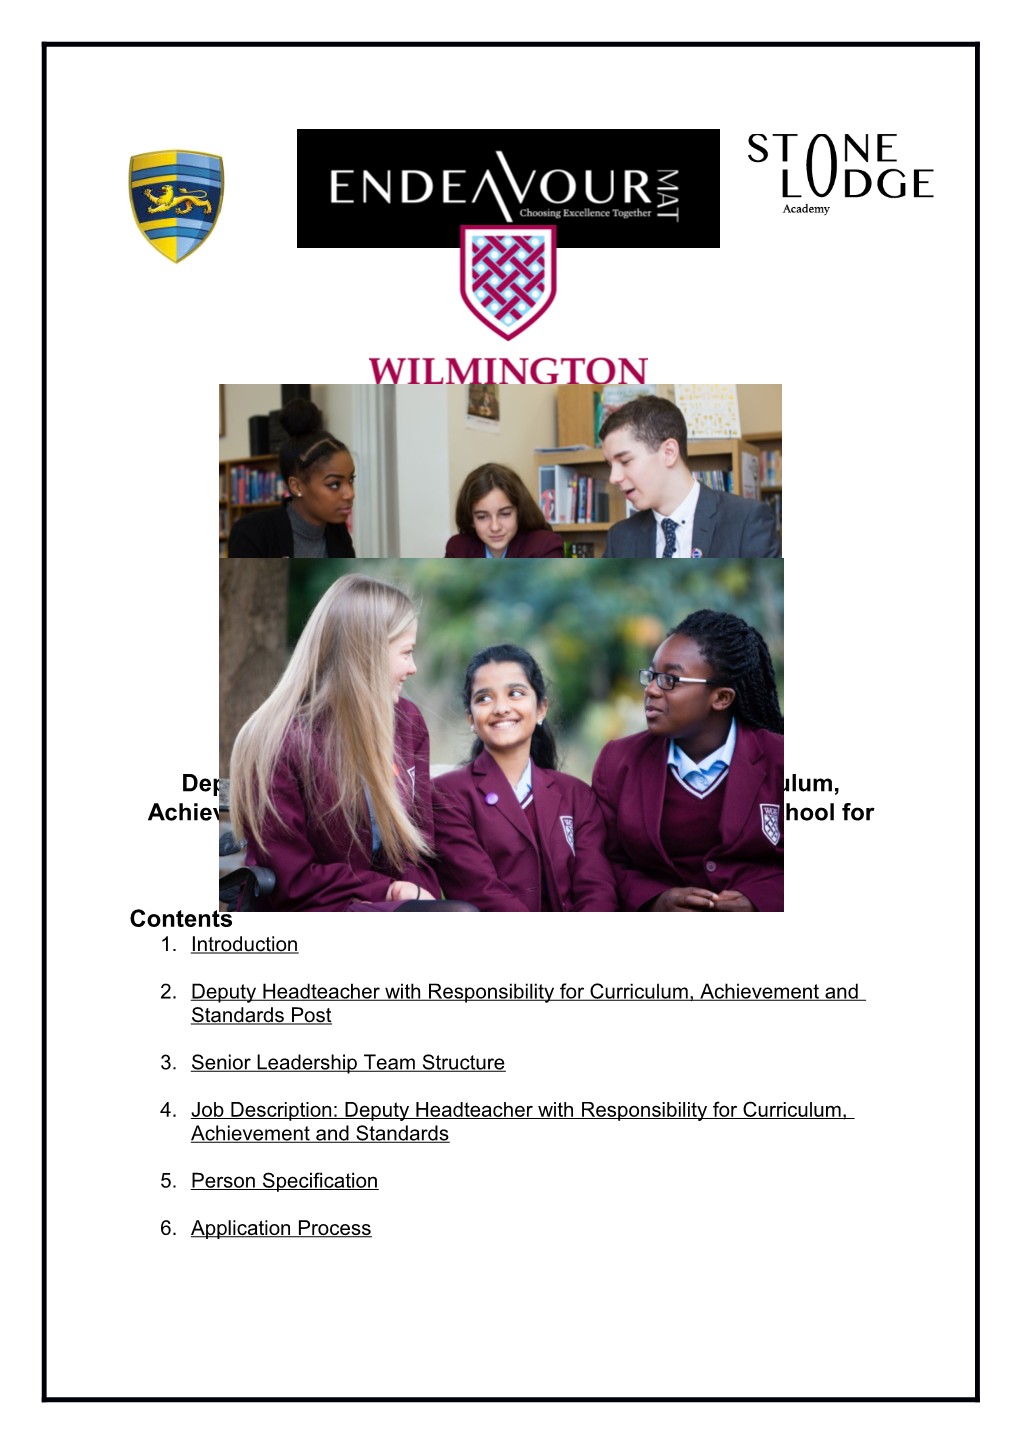 Deputy Headteacher with Responsibility for Curriculum, Achievement and Standards at Wilmington